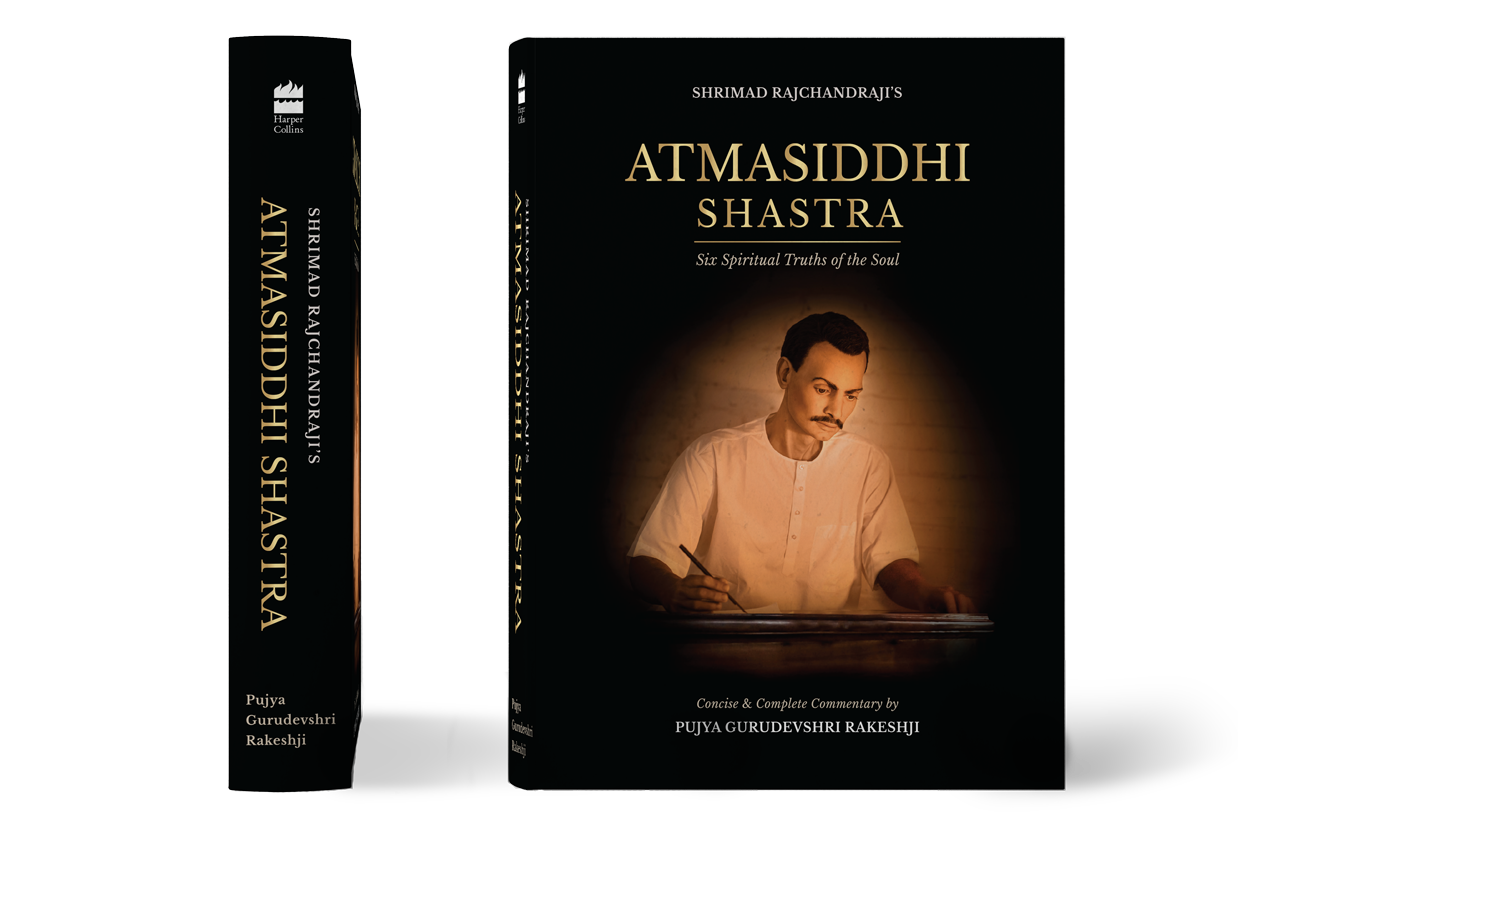 Pre order Atmasiddhi Shastra: Six Spiritual Truths of the Soul